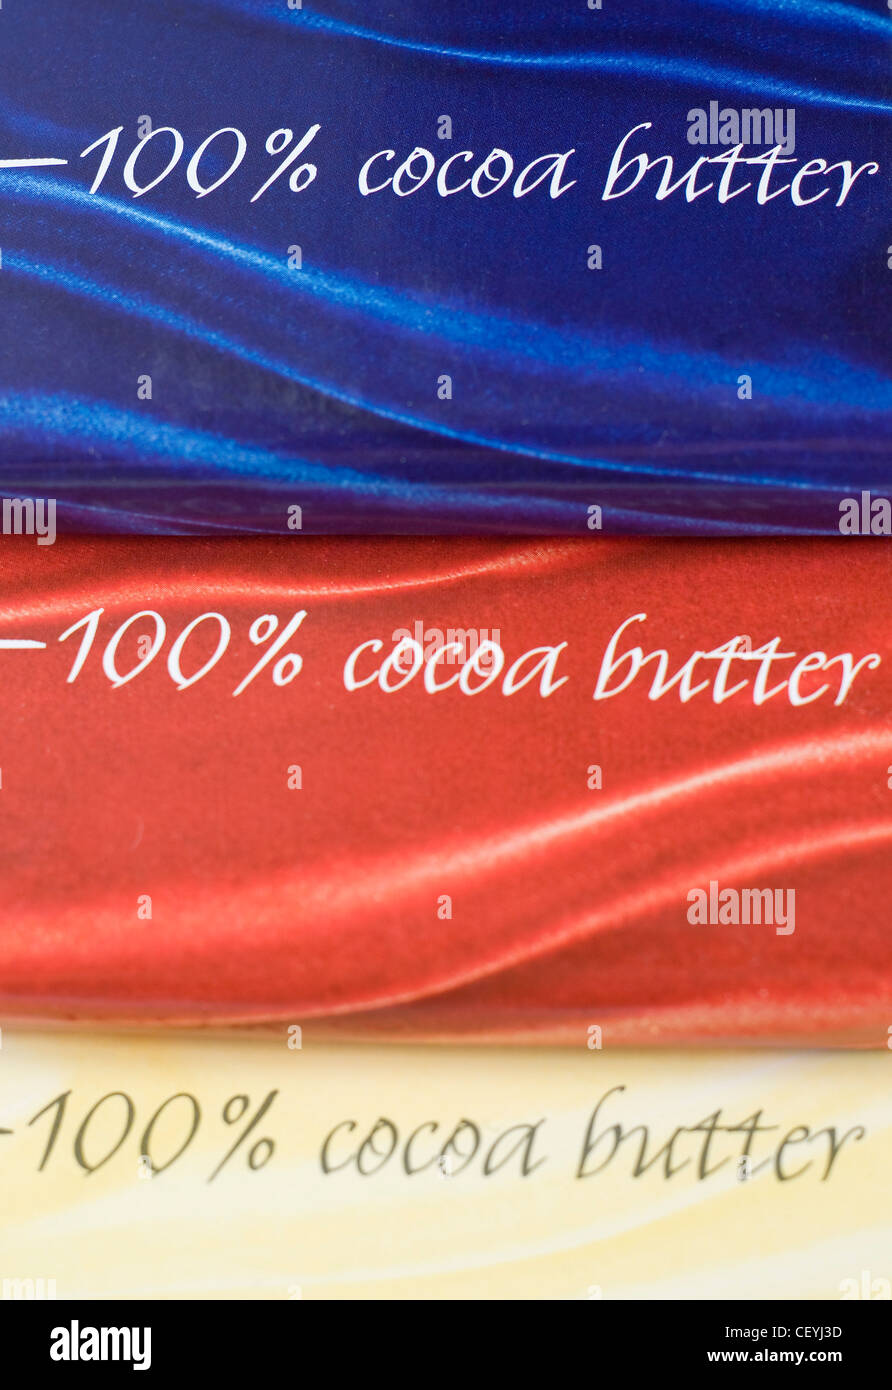 A still life image of blue, red and yellow chocolate wrapping paper with per cent cocoa butter written on it Stock Photo